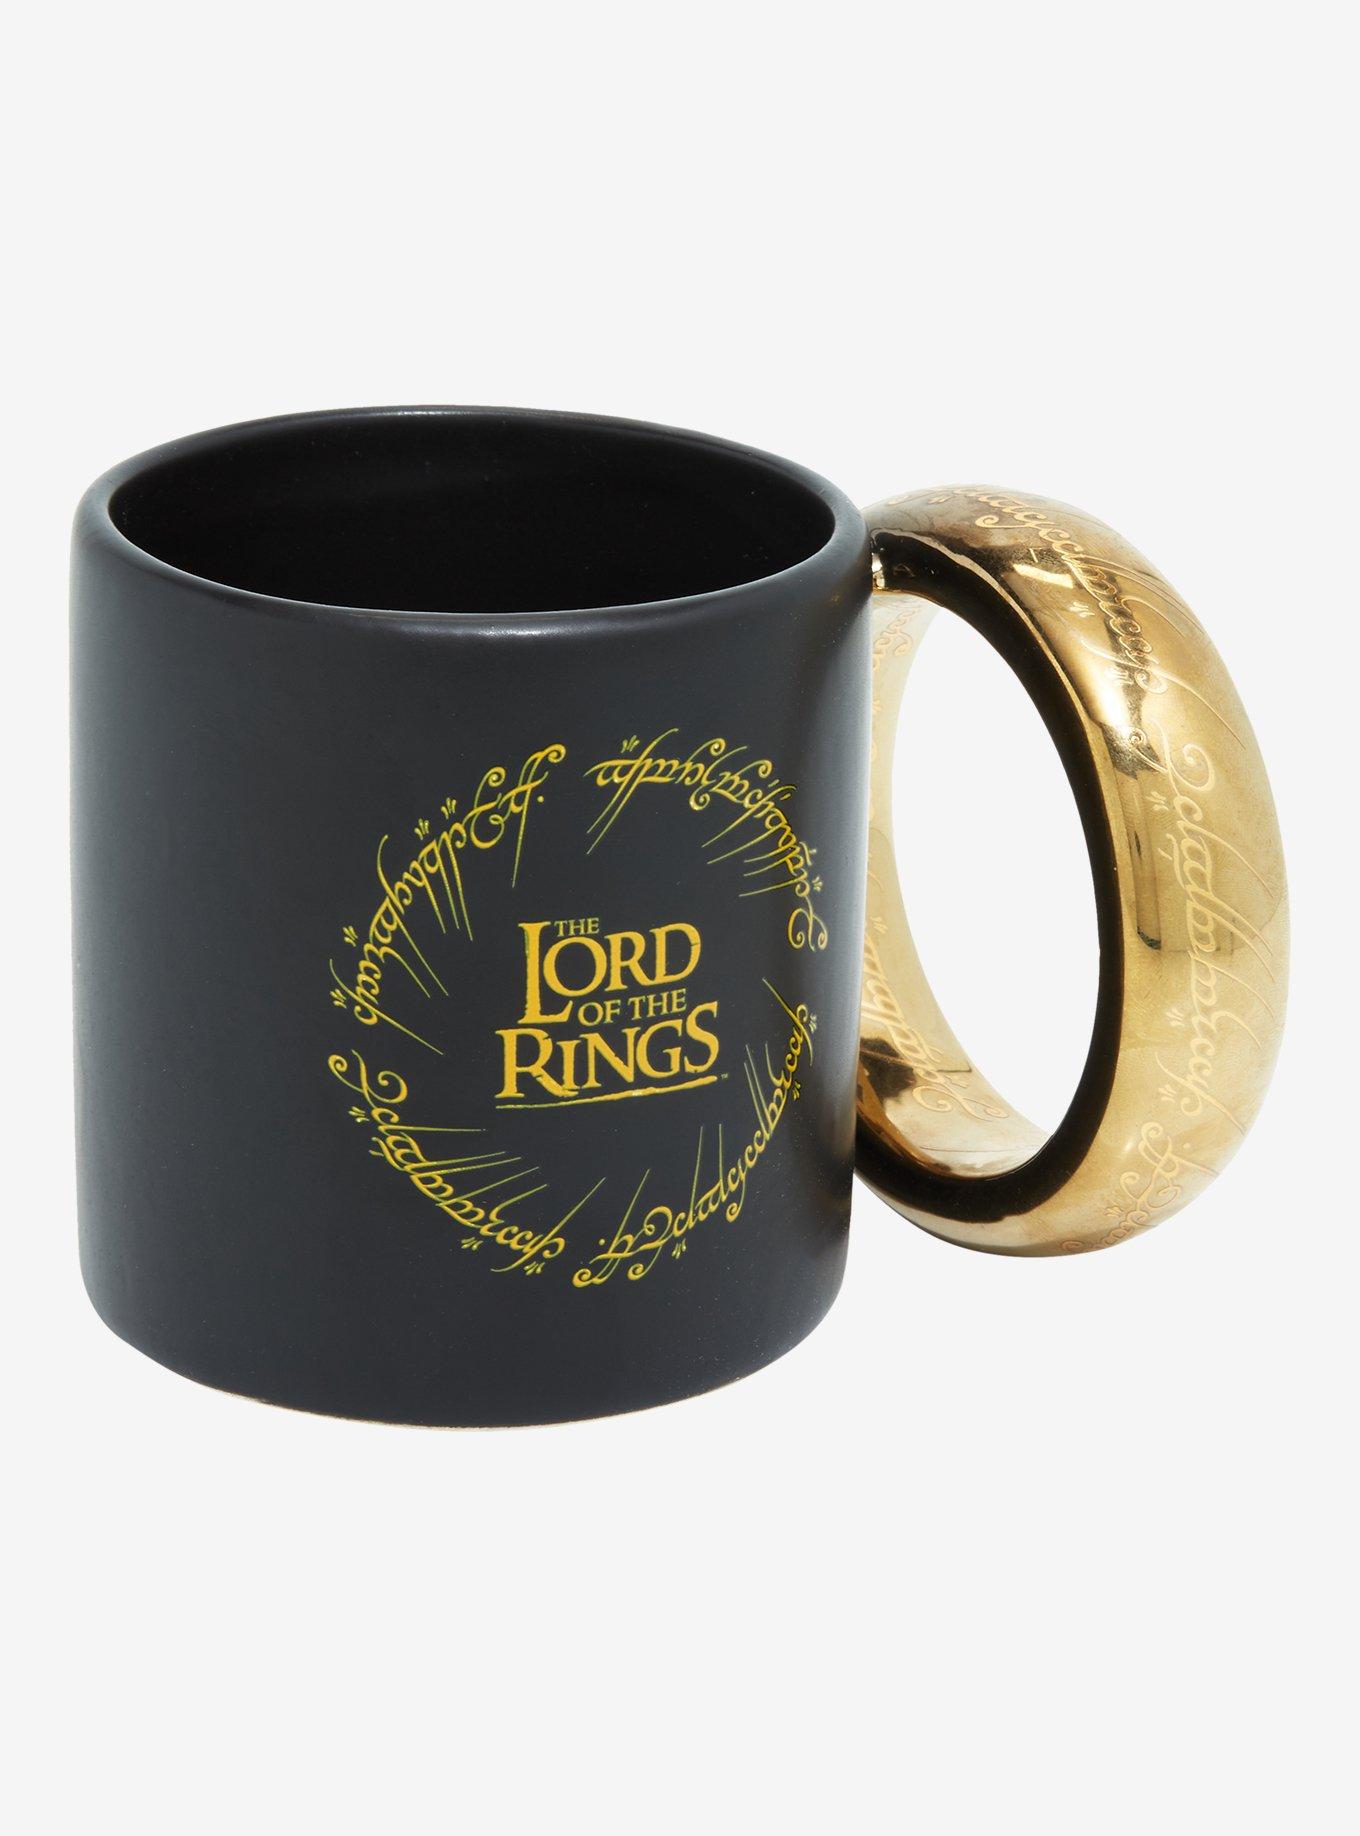 The Lord Of The Rings One Ring Mug